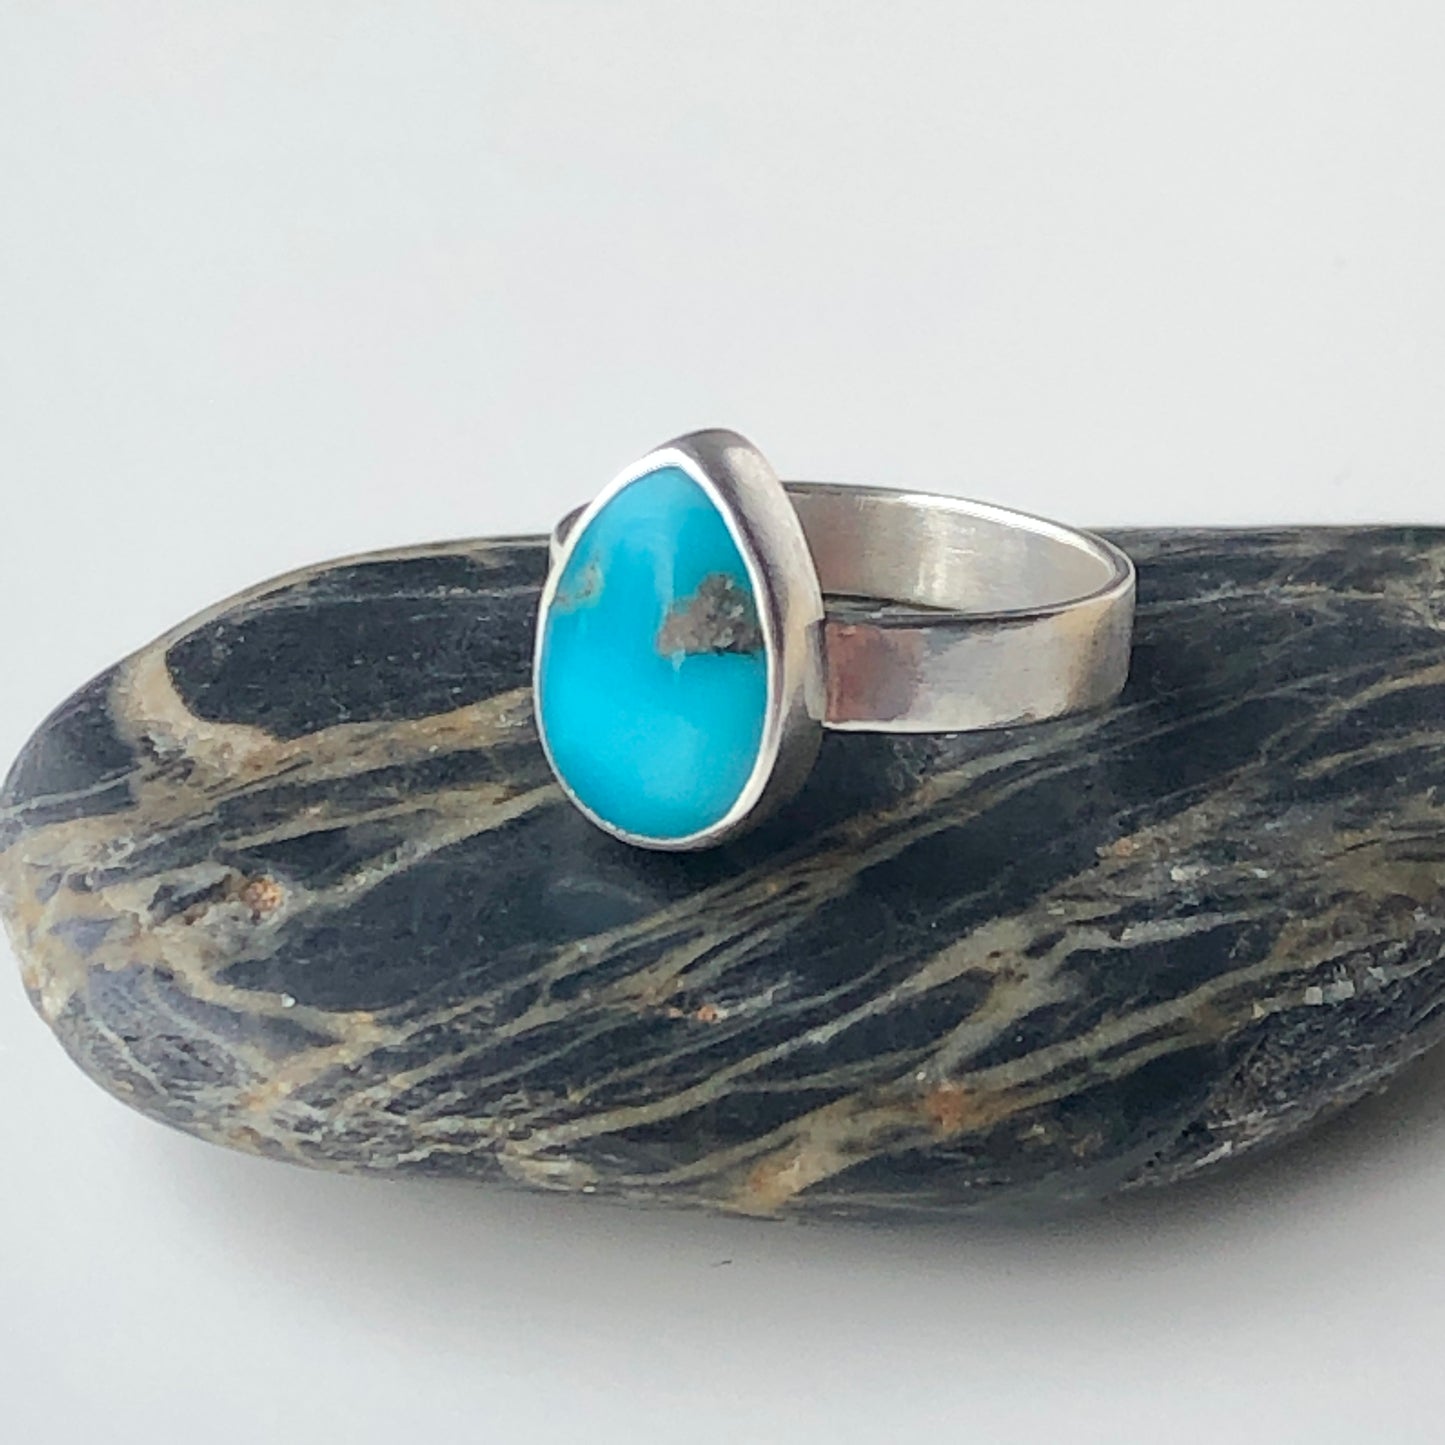 Teardrop Turquoise and Silver Ring - Size 7 1/4